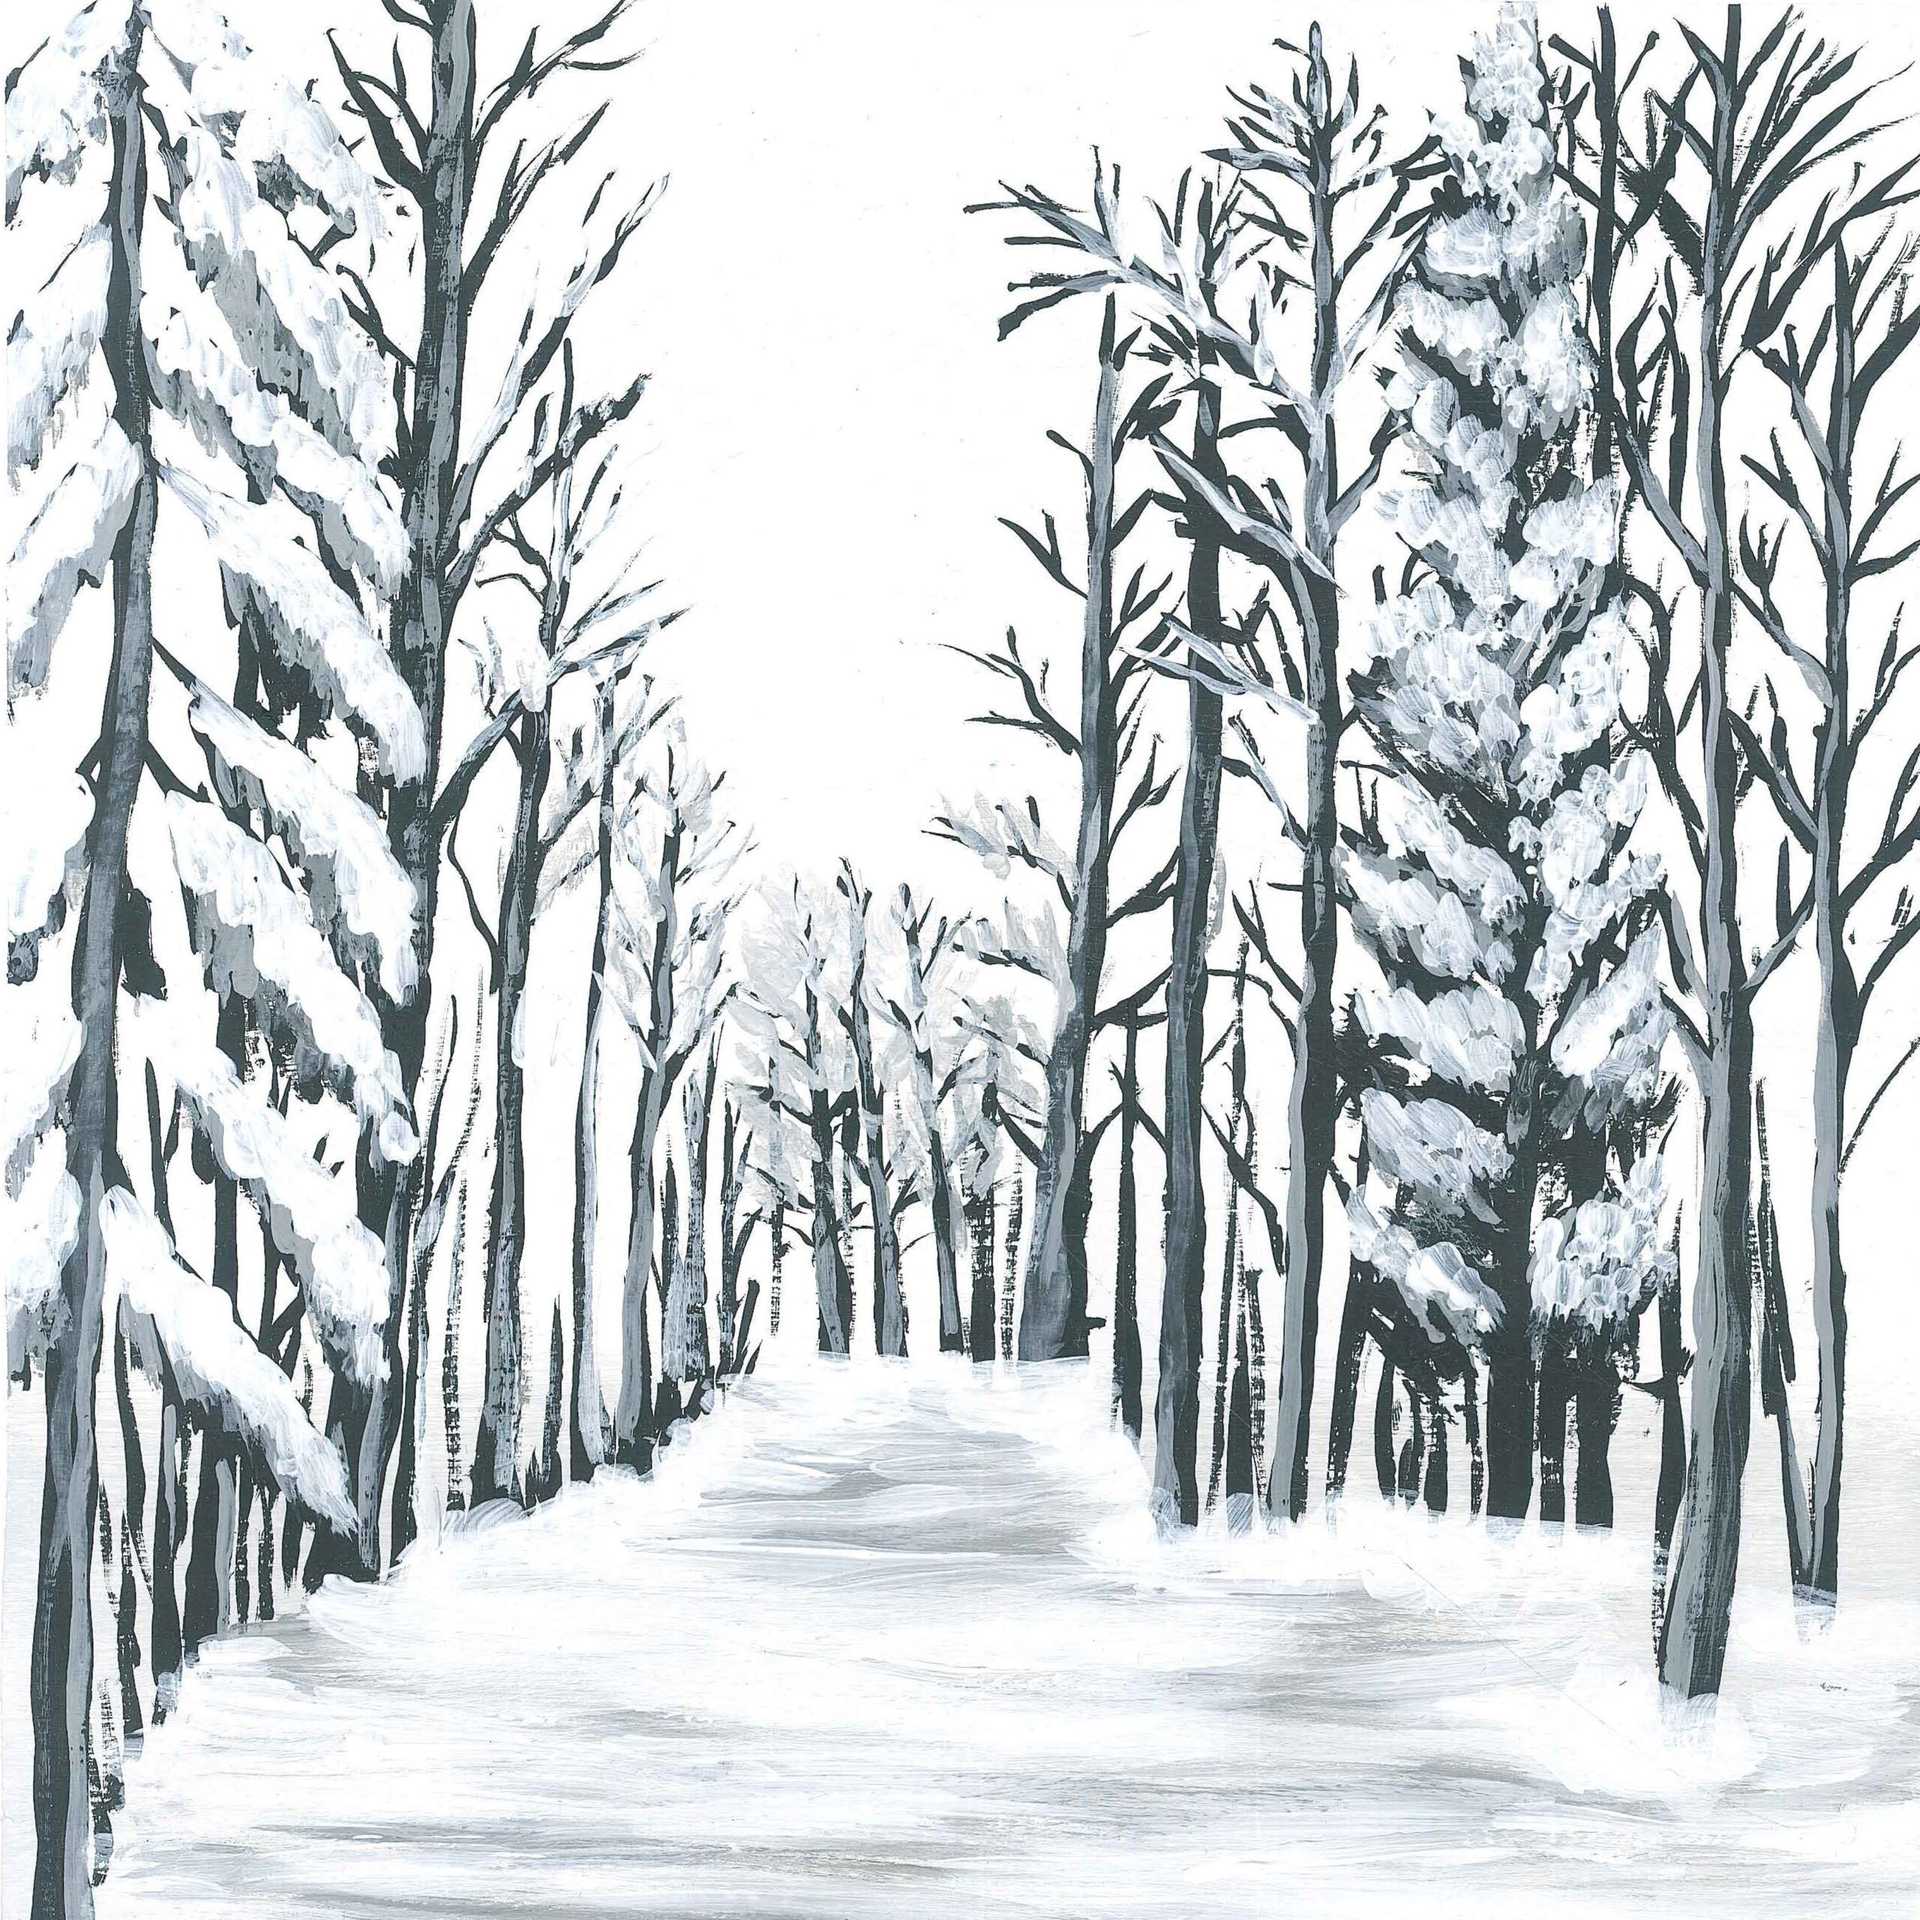 Snow in forest - nature landscape painting - earth.fm